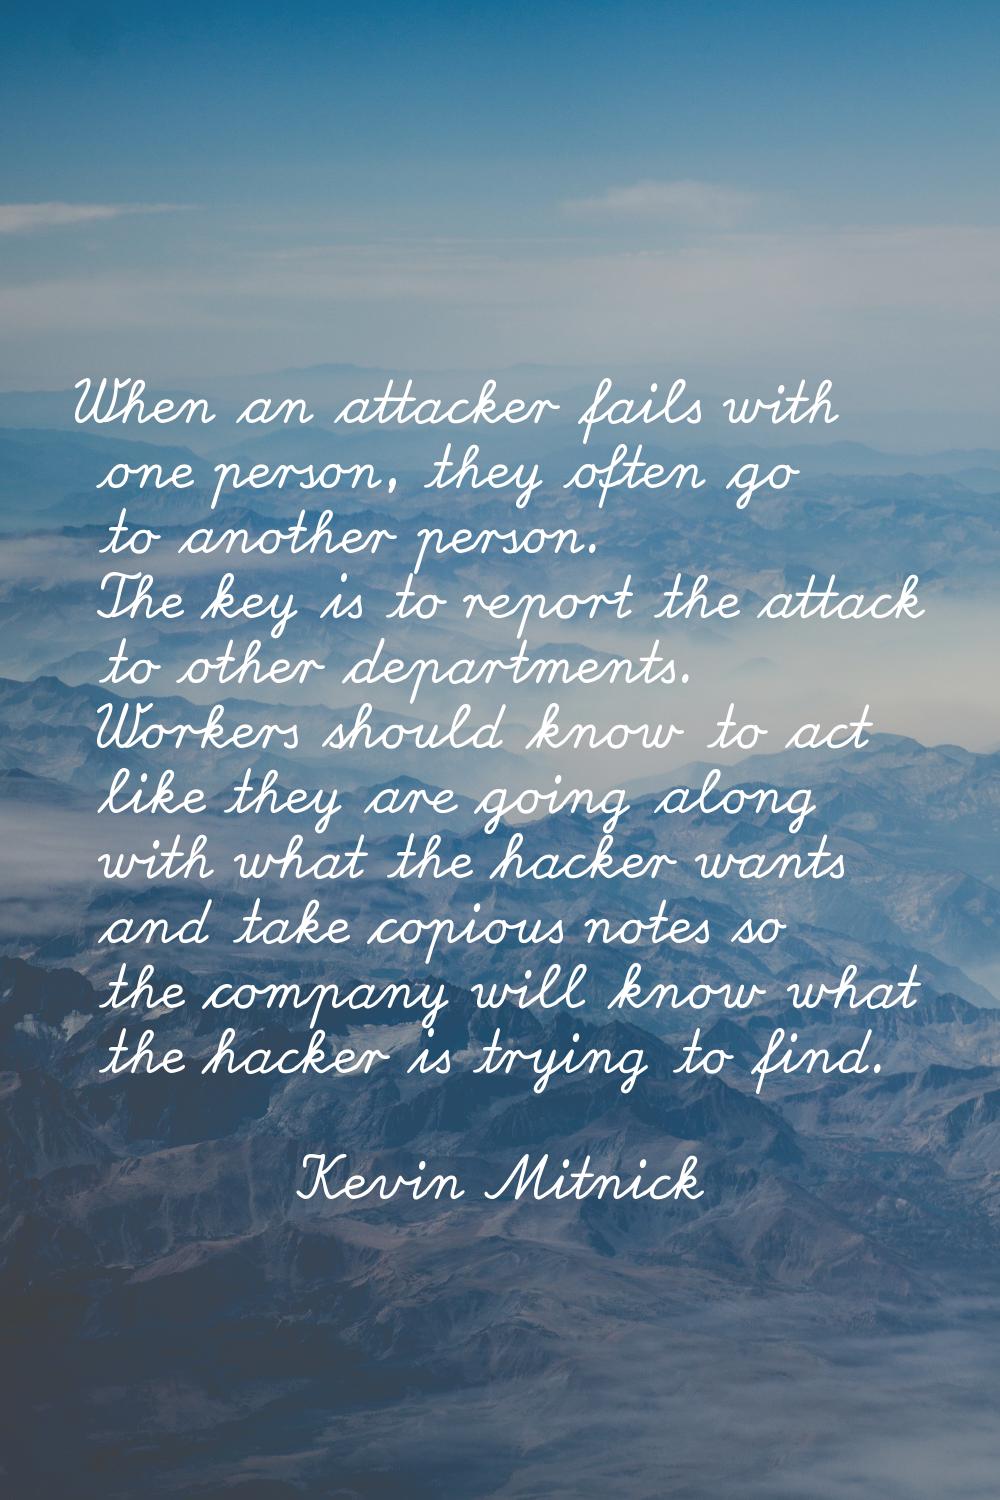 When an attacker fails with one person, they often go to another person. The key is to report the a